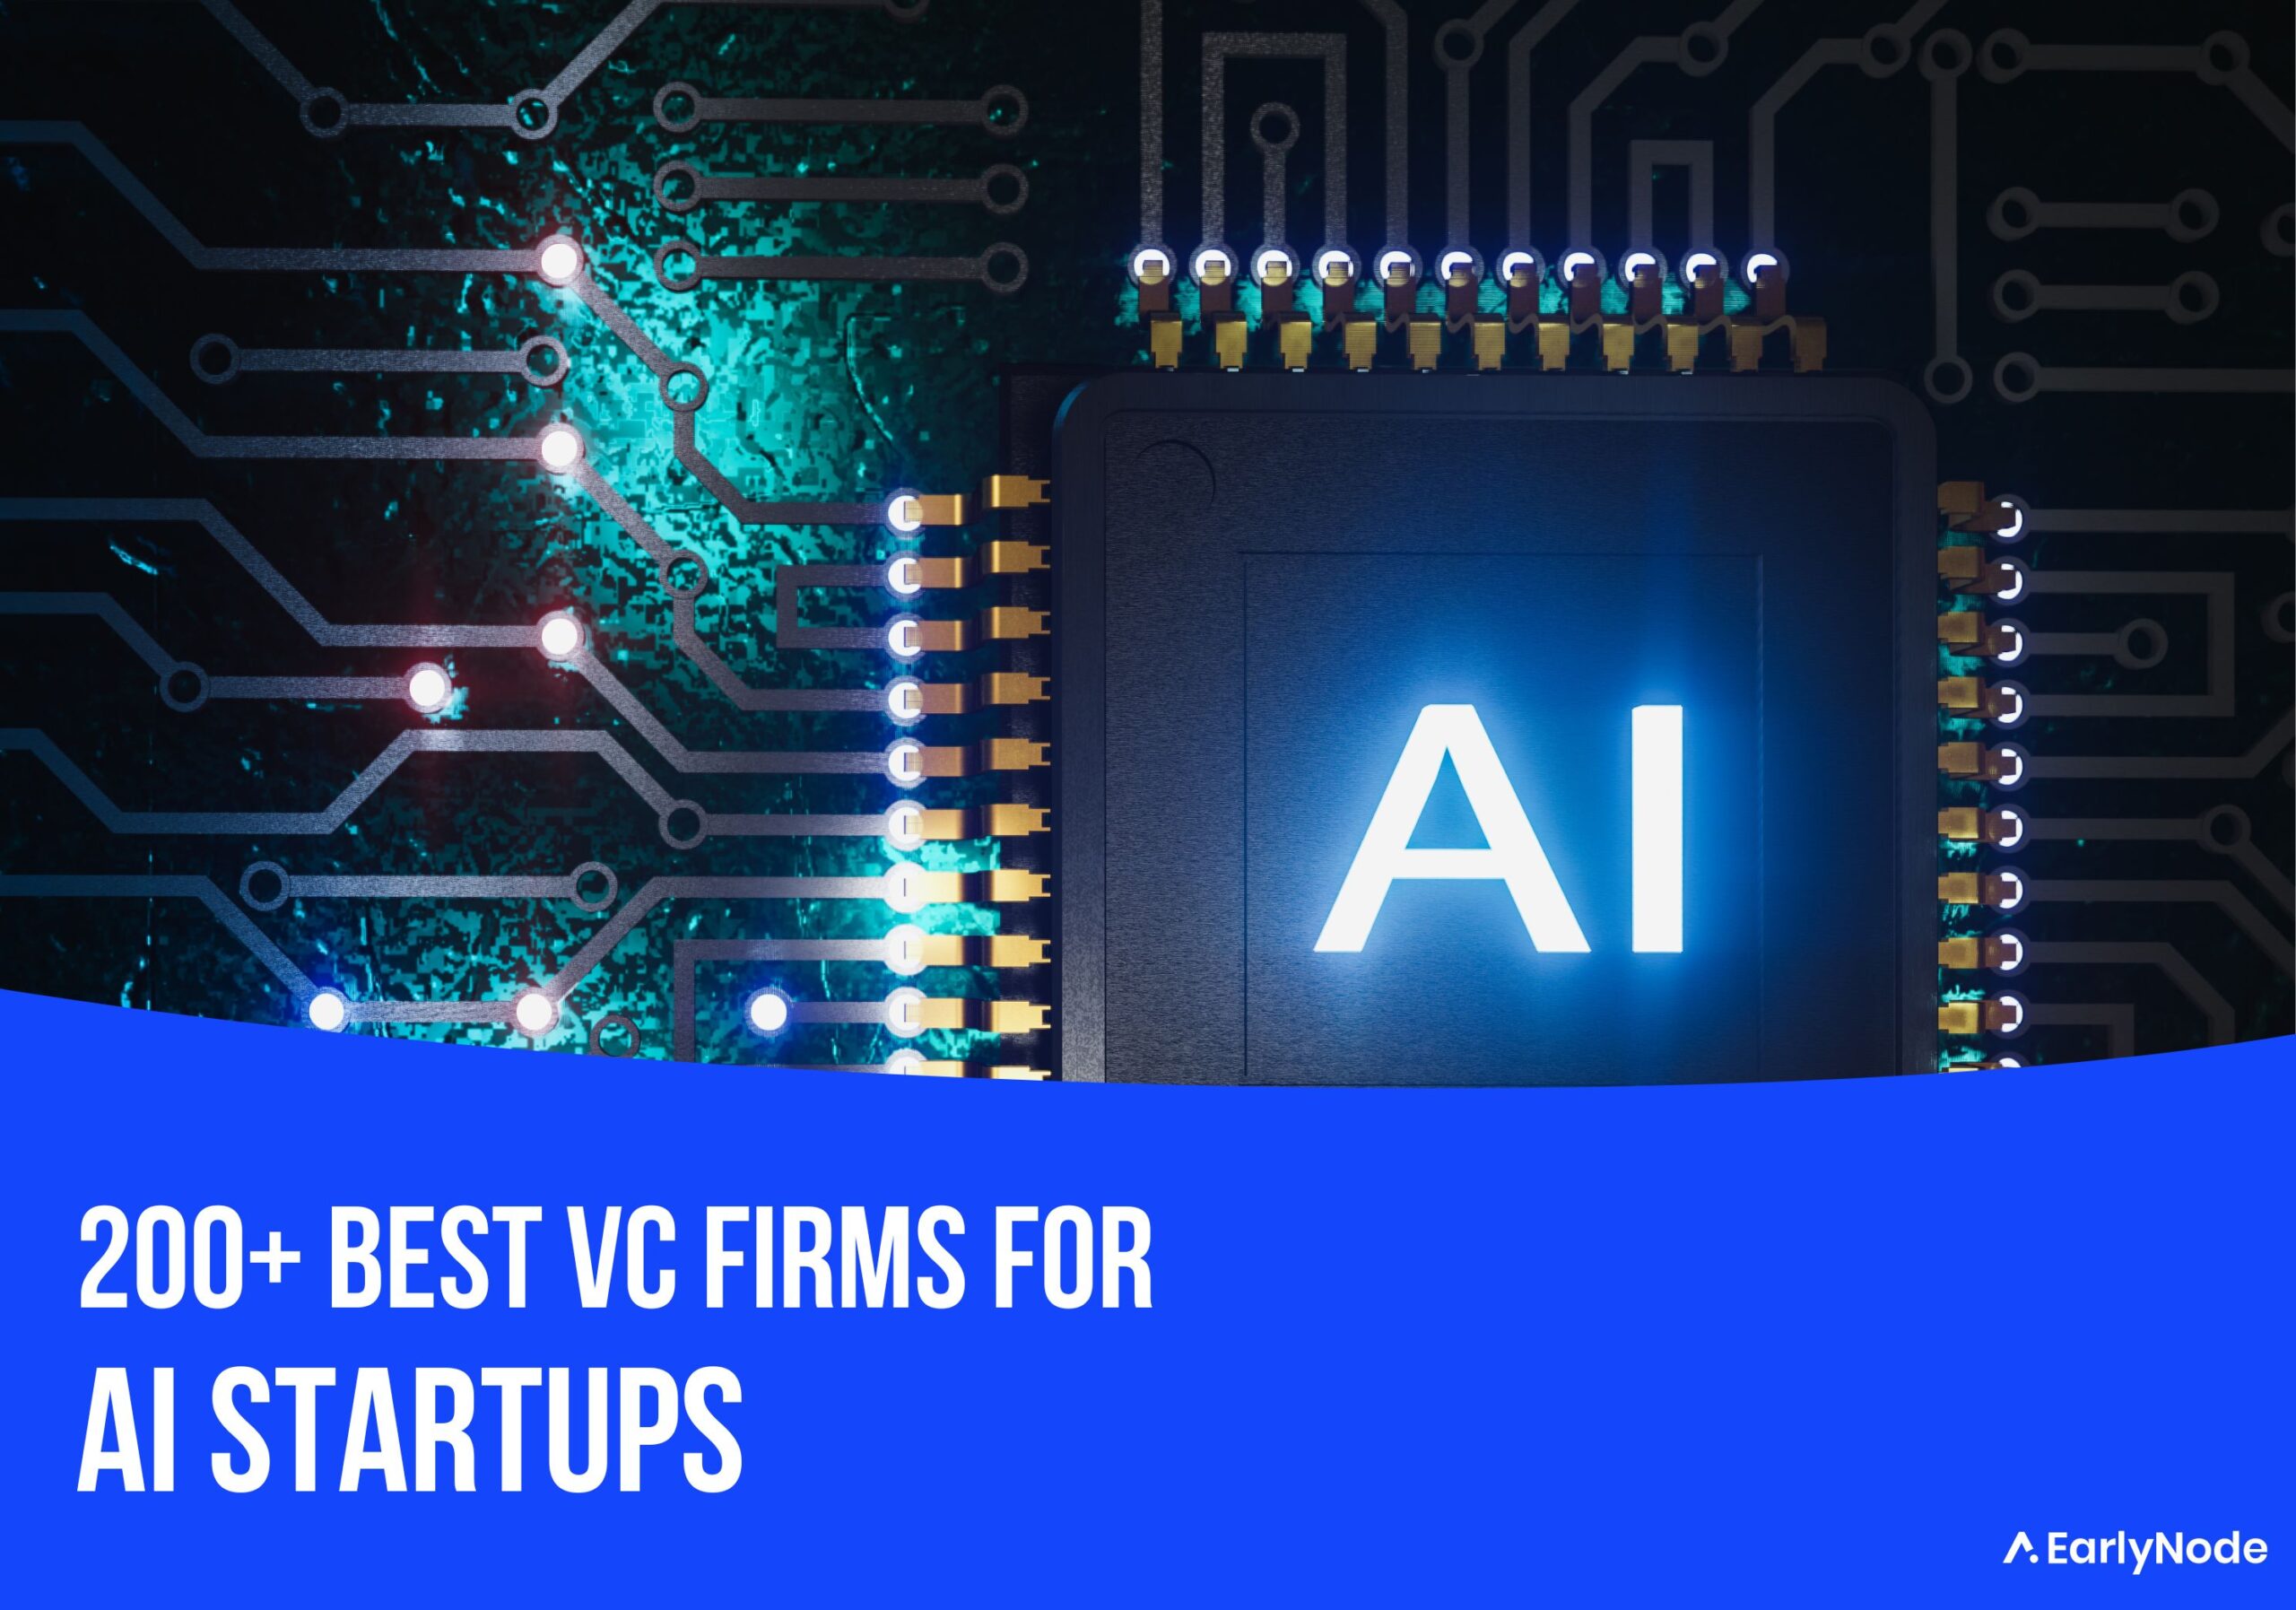 200+ Top VC Firms that Invest in AI startups